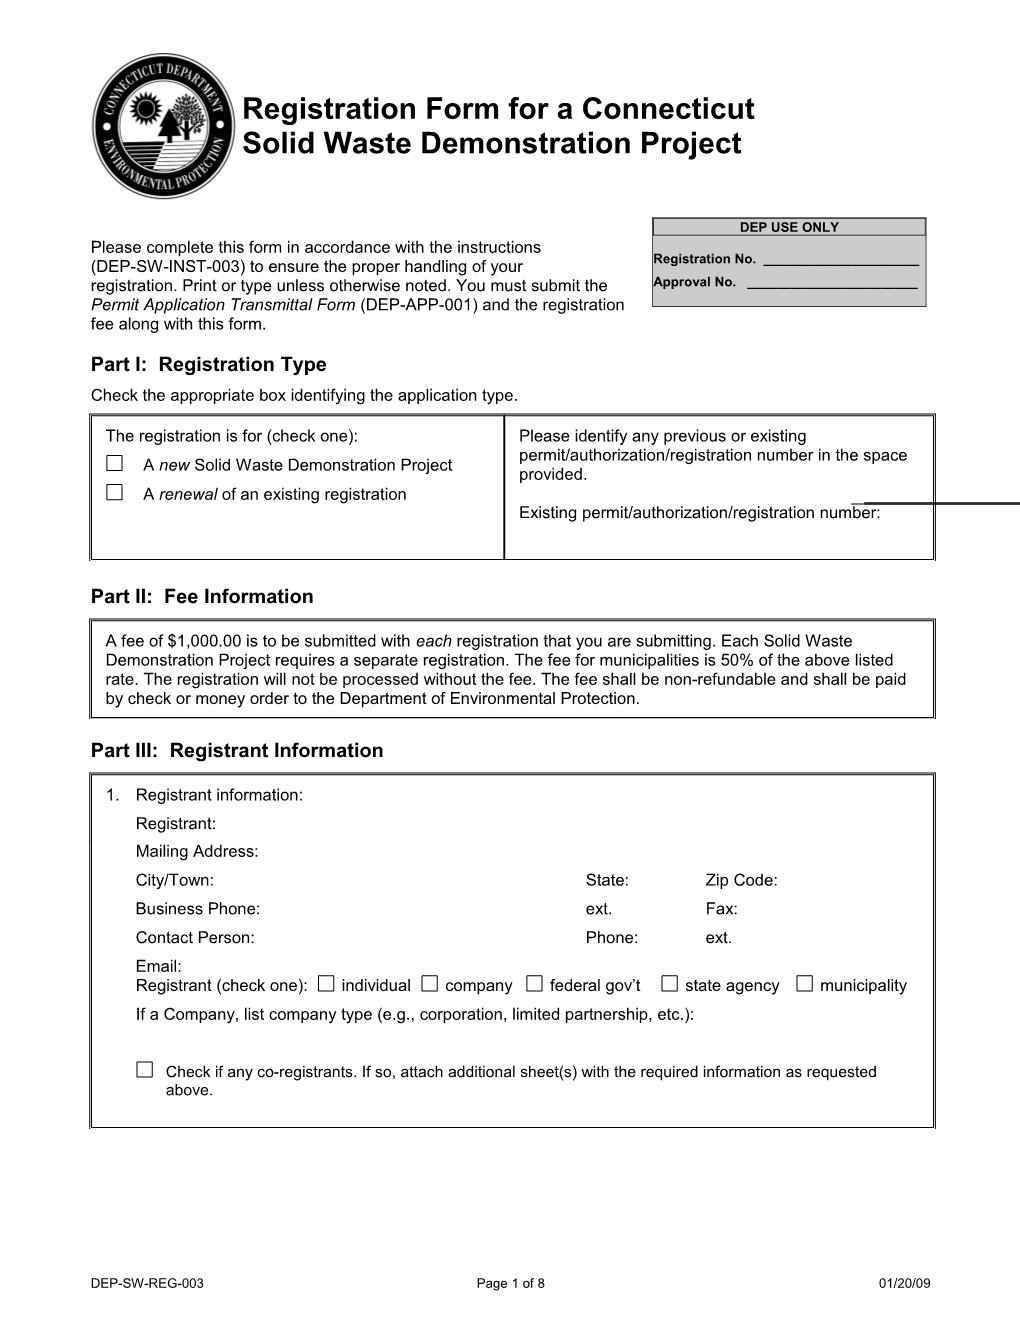 Registration Form for a Connecticut Solid Waste Demonstration Project